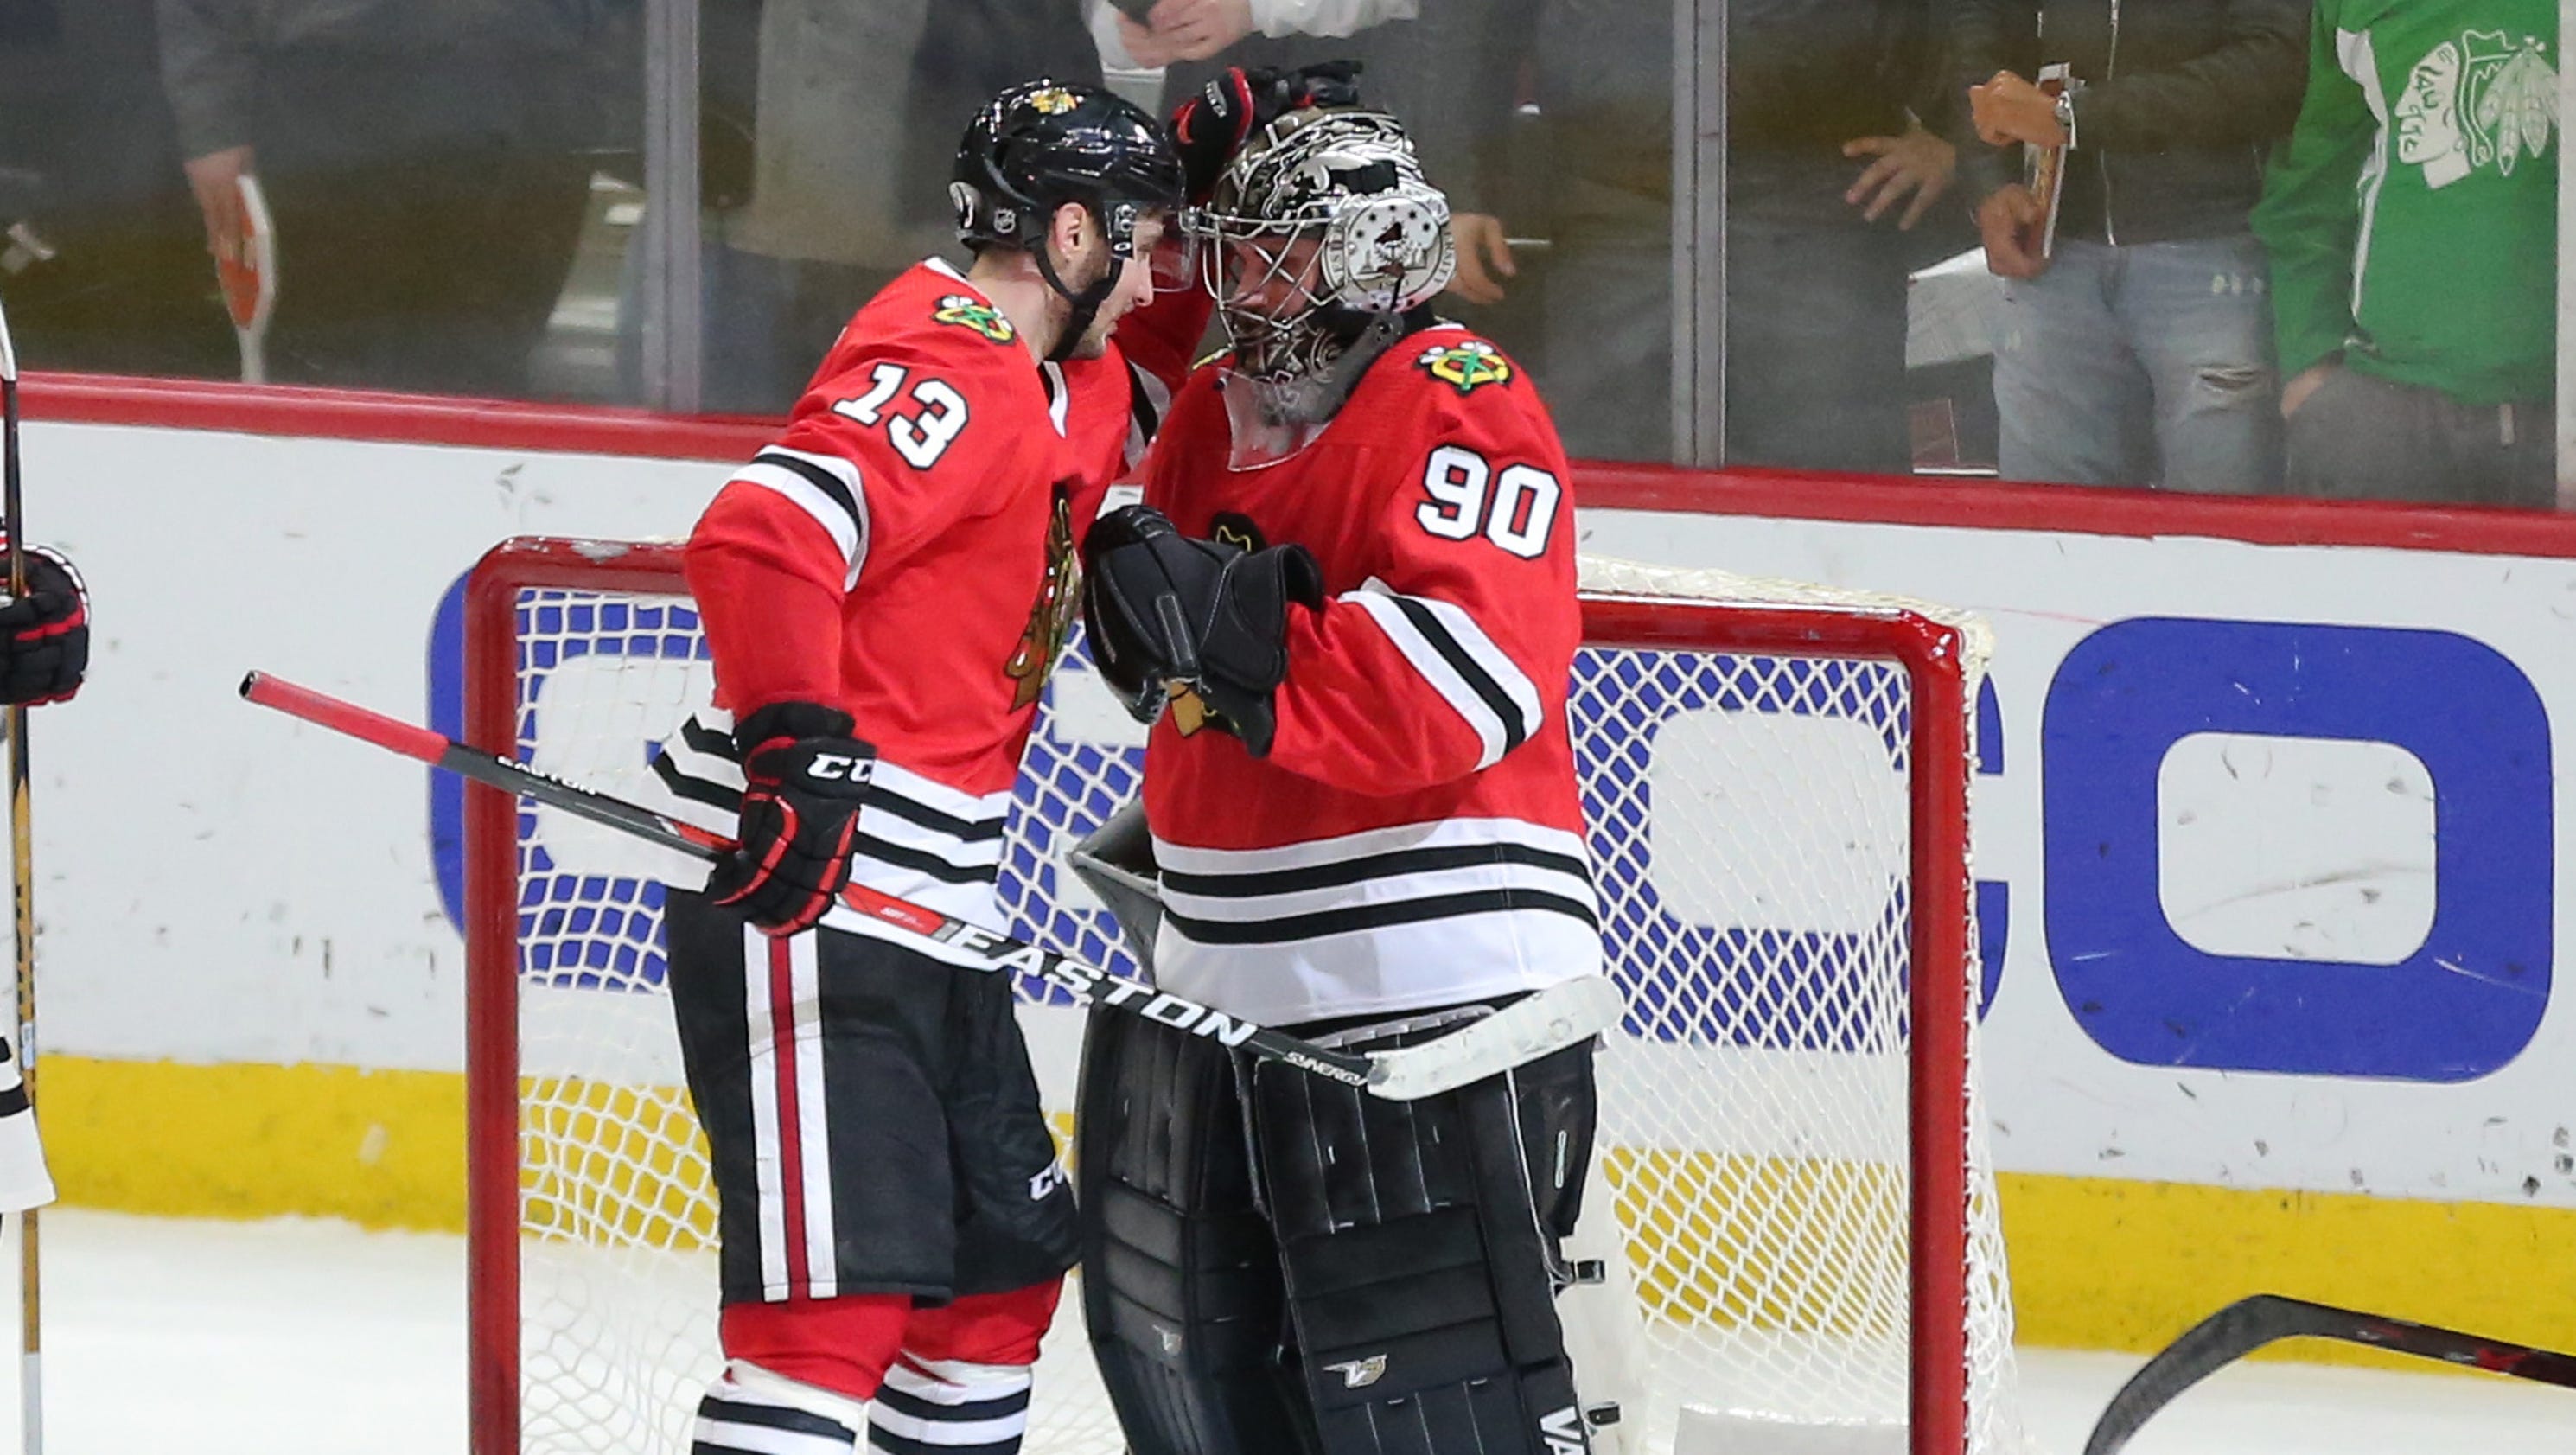 How did a 36-year-old accountant play goalie in Chicago Blackhawks' win?